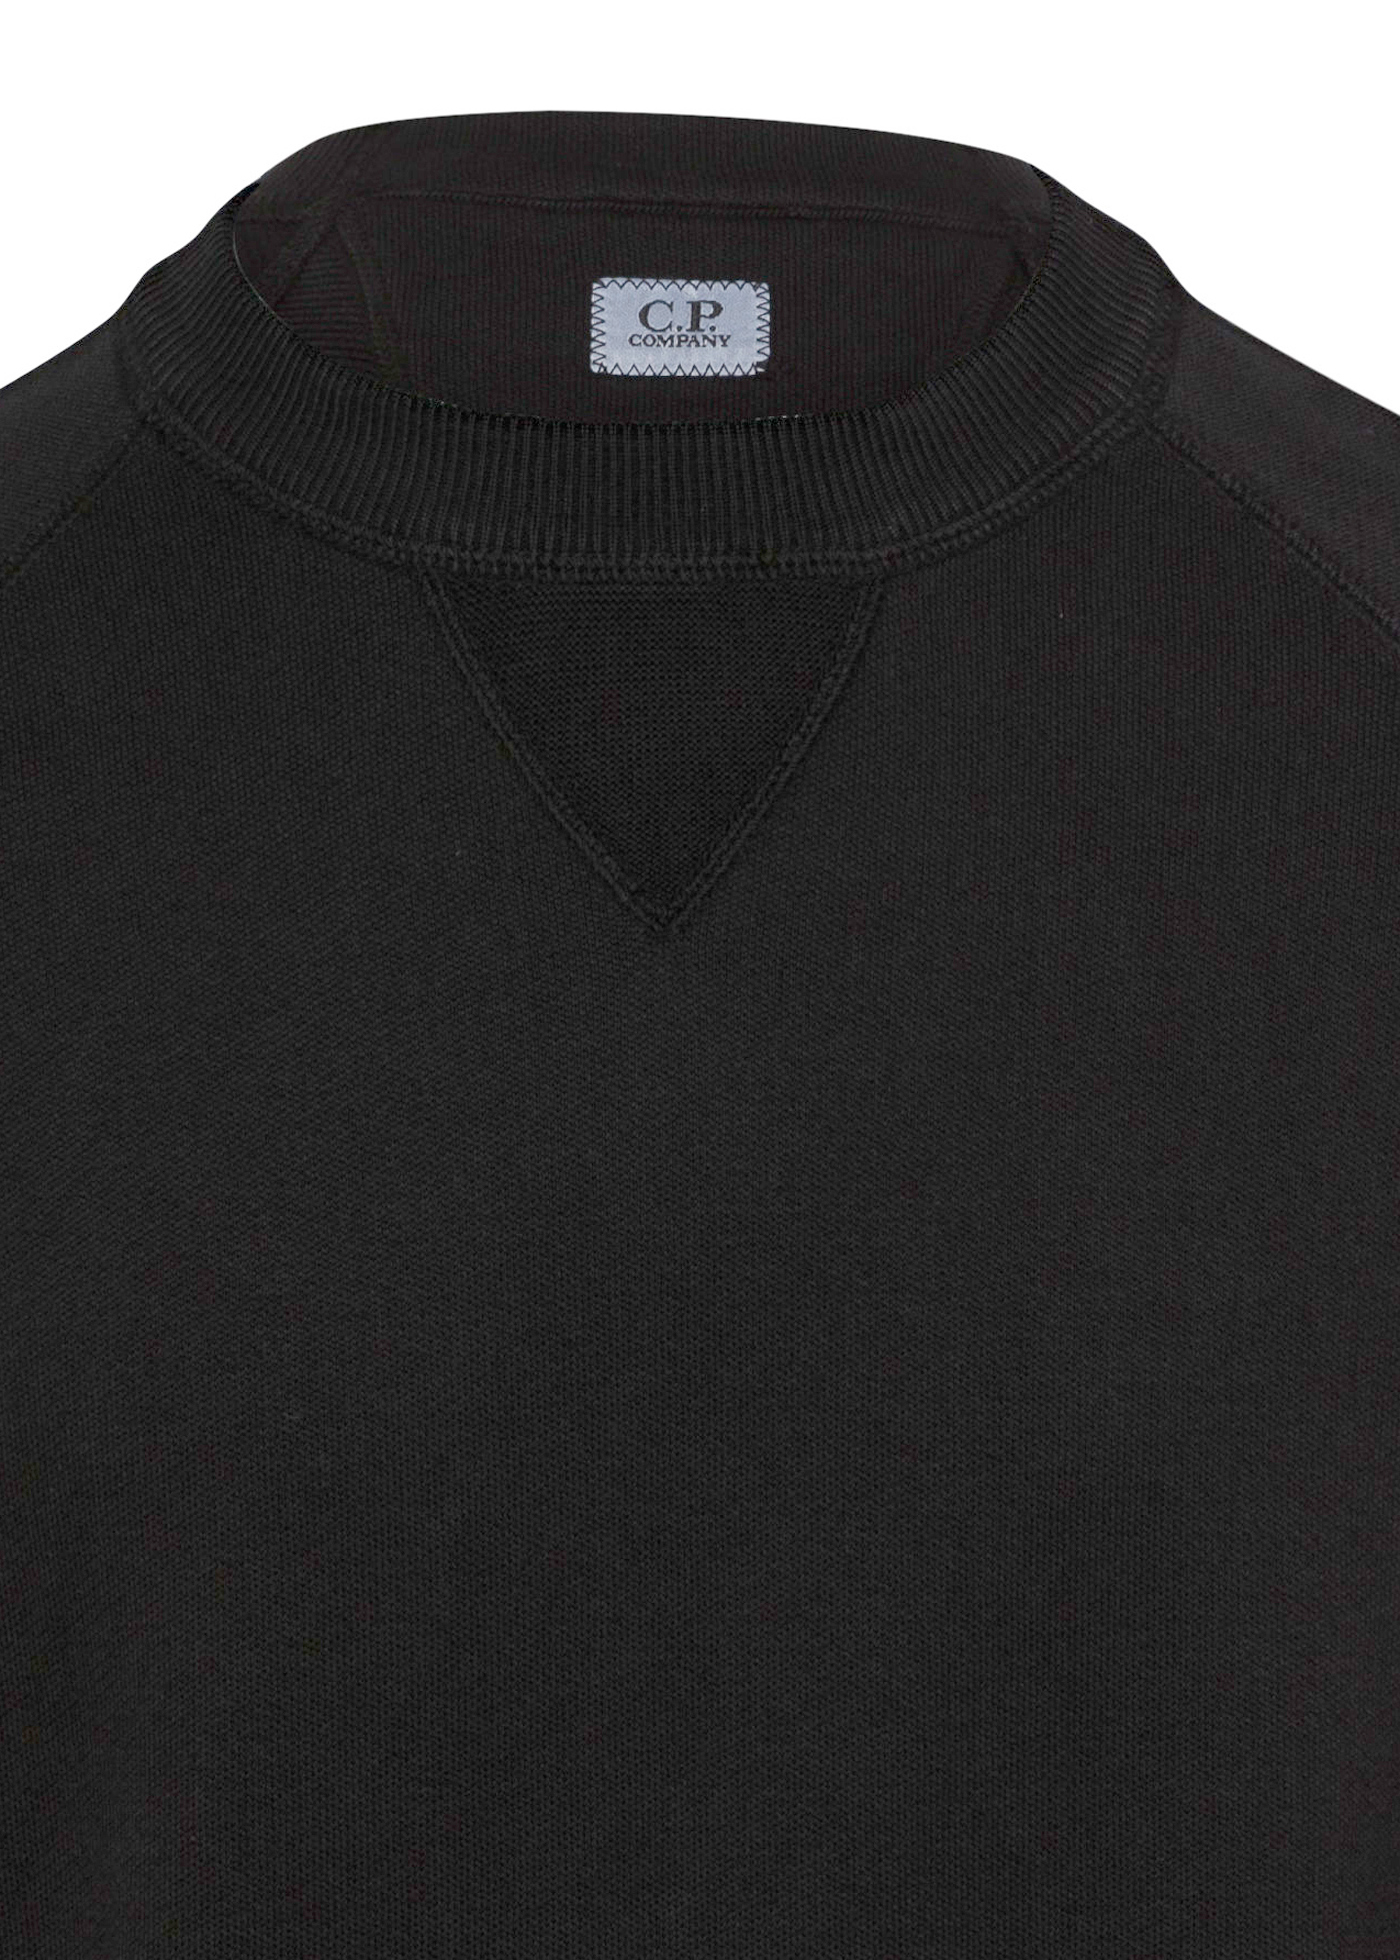 COTTON KNIT CREW NECK SWEATER image number 2